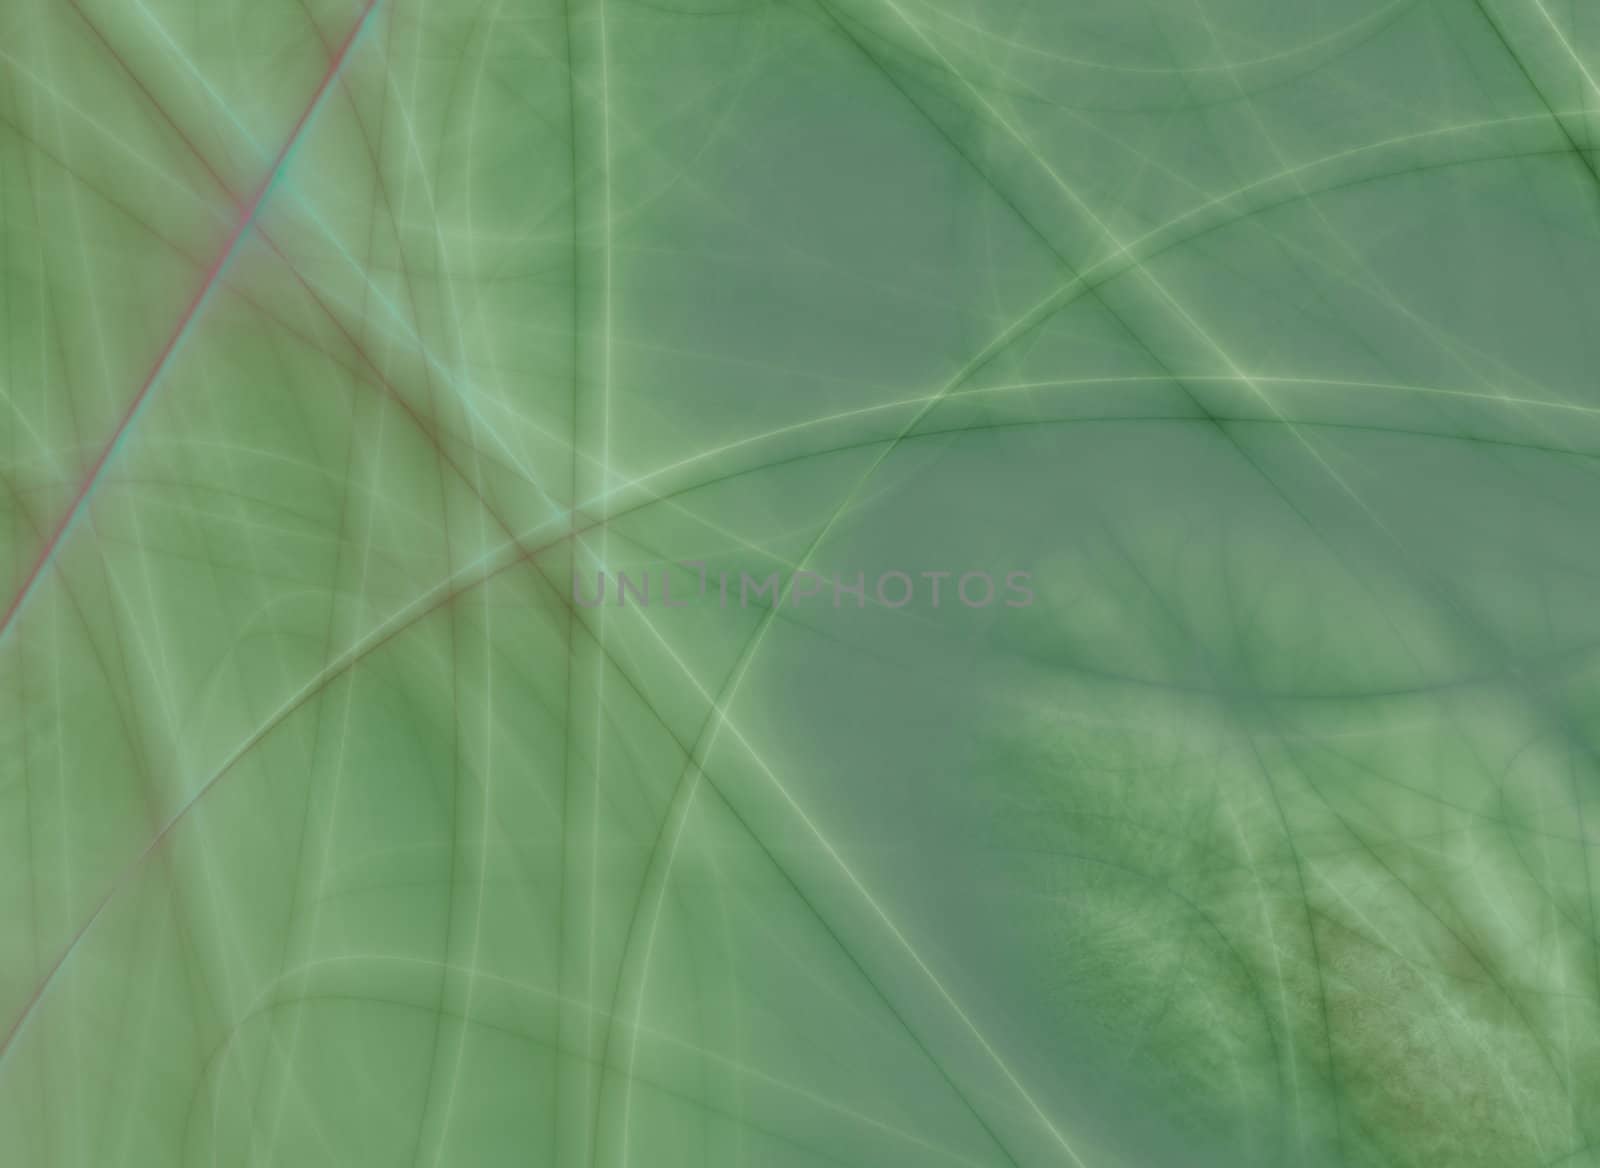 Digitally generated abstract fractal background by Arsen